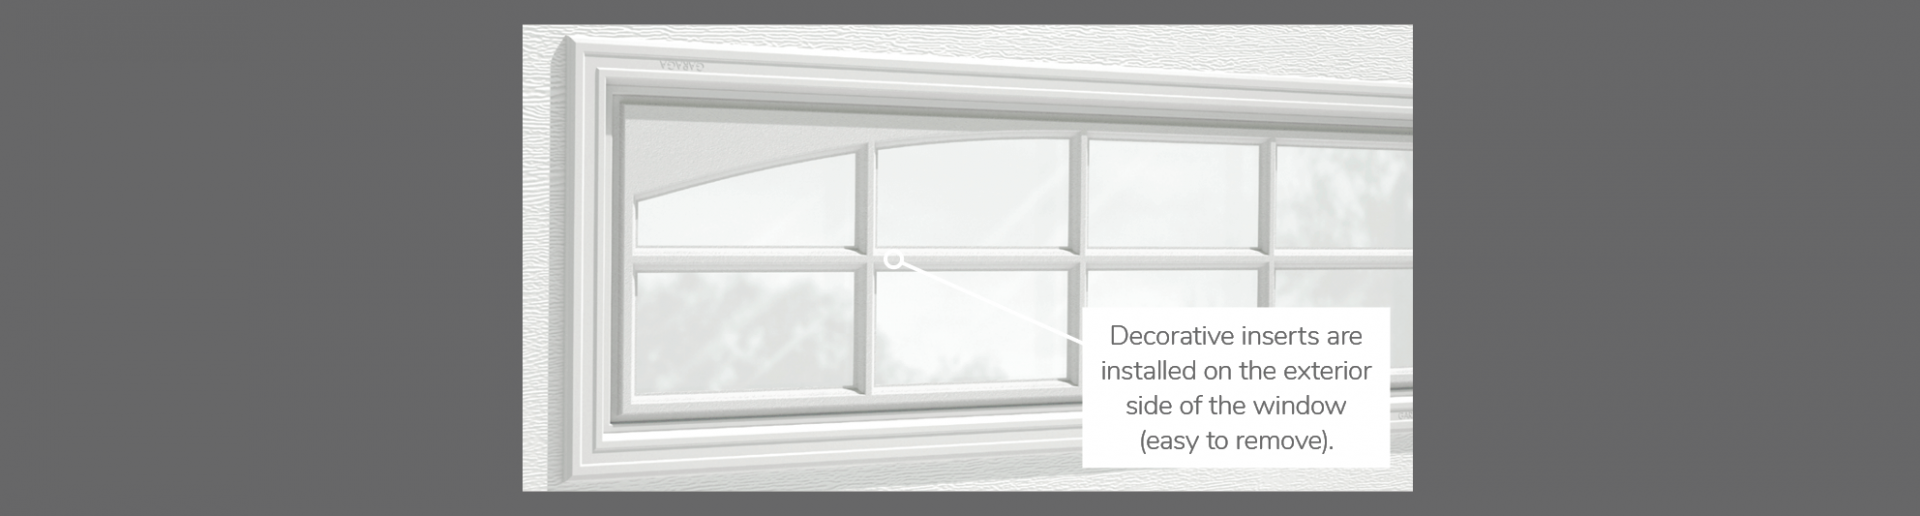 Double Stockton Arch Decorative Insert, 40" x 13", available for door R-16